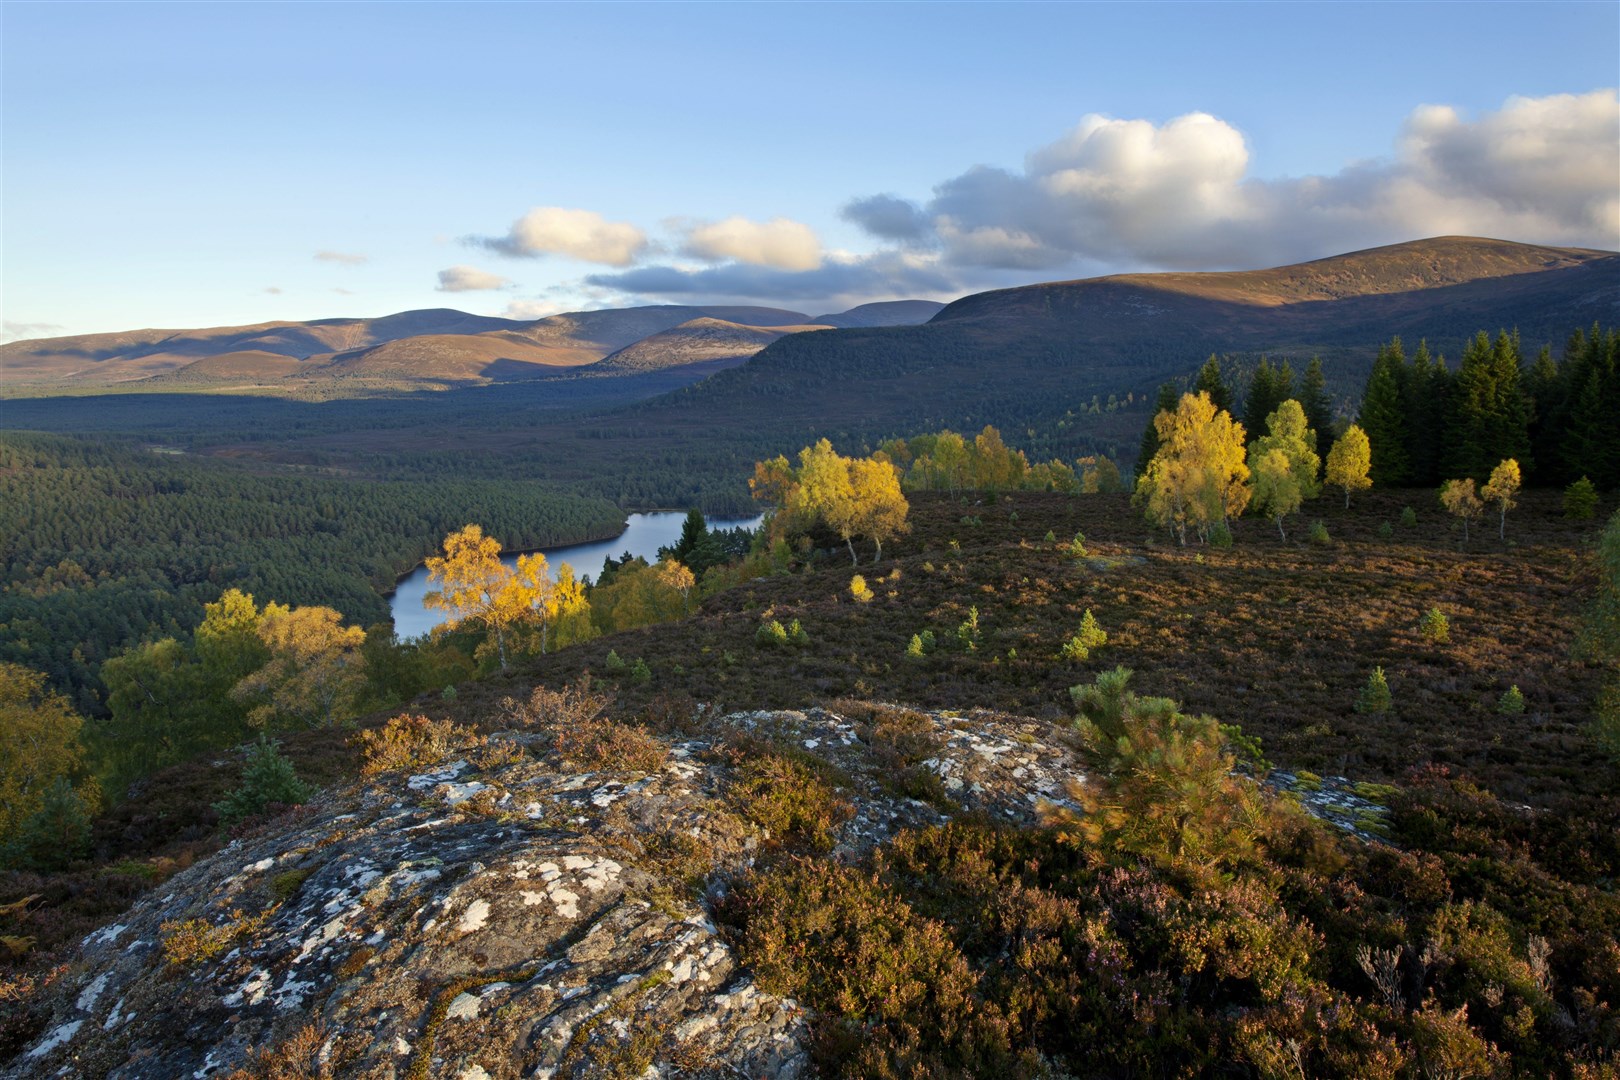 Scattered birch and pine woodland at Rothiemurchus Forest, in the Cairngorms National Park.